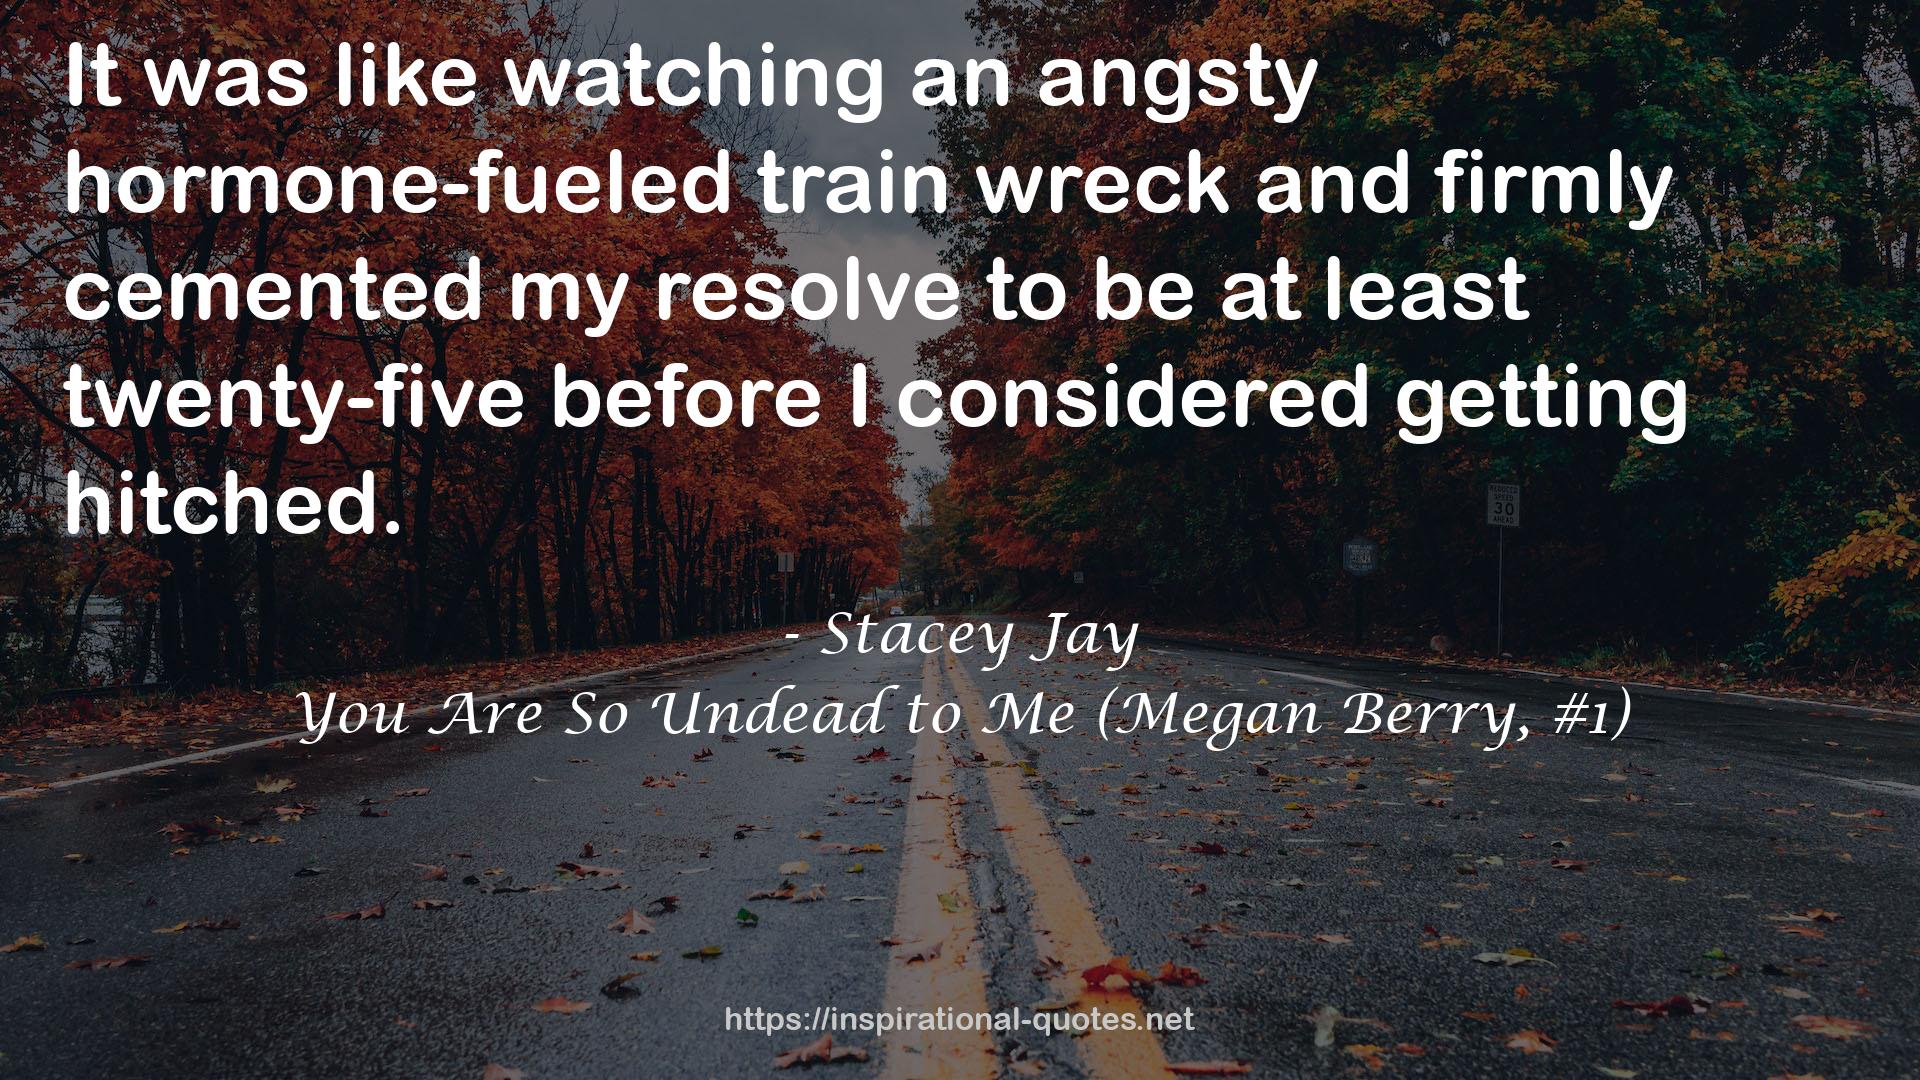 You Are So Undead to Me (Megan Berry, #1) QUOTES